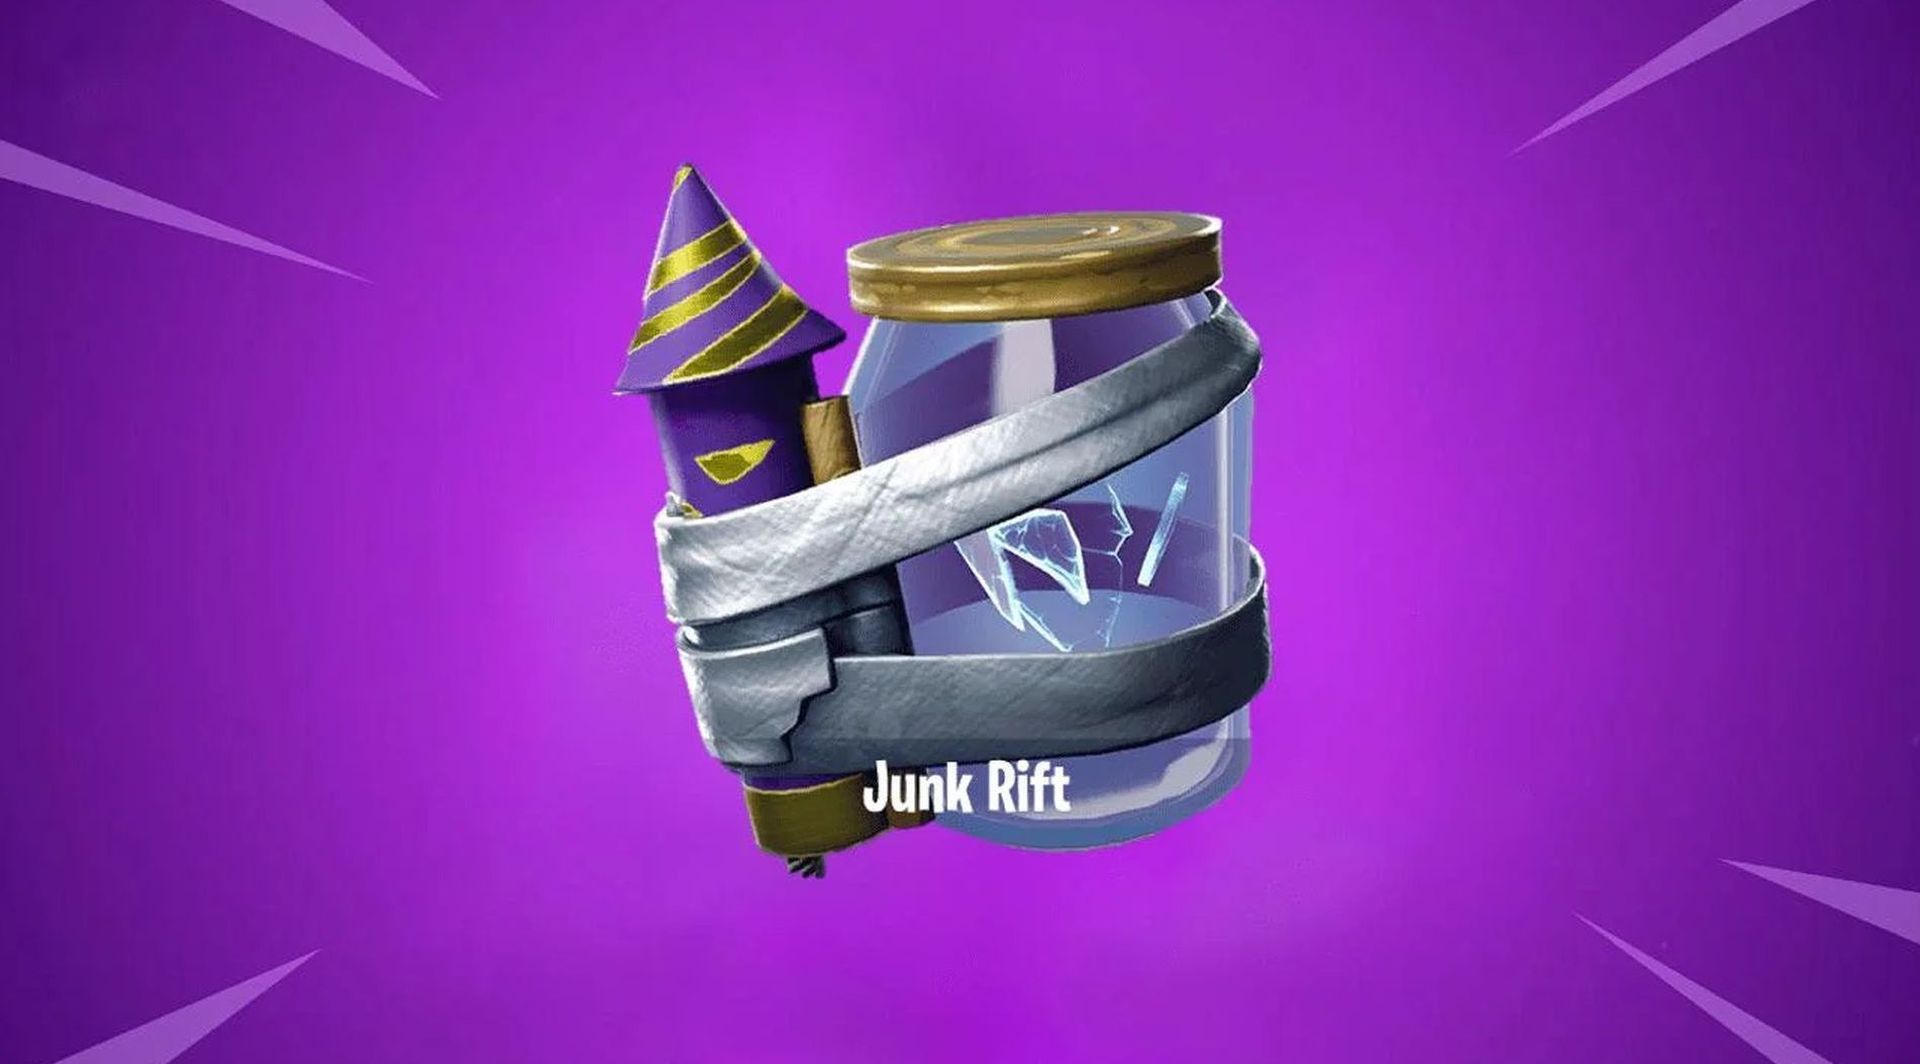 How to use Junk Rift in Fortnite?